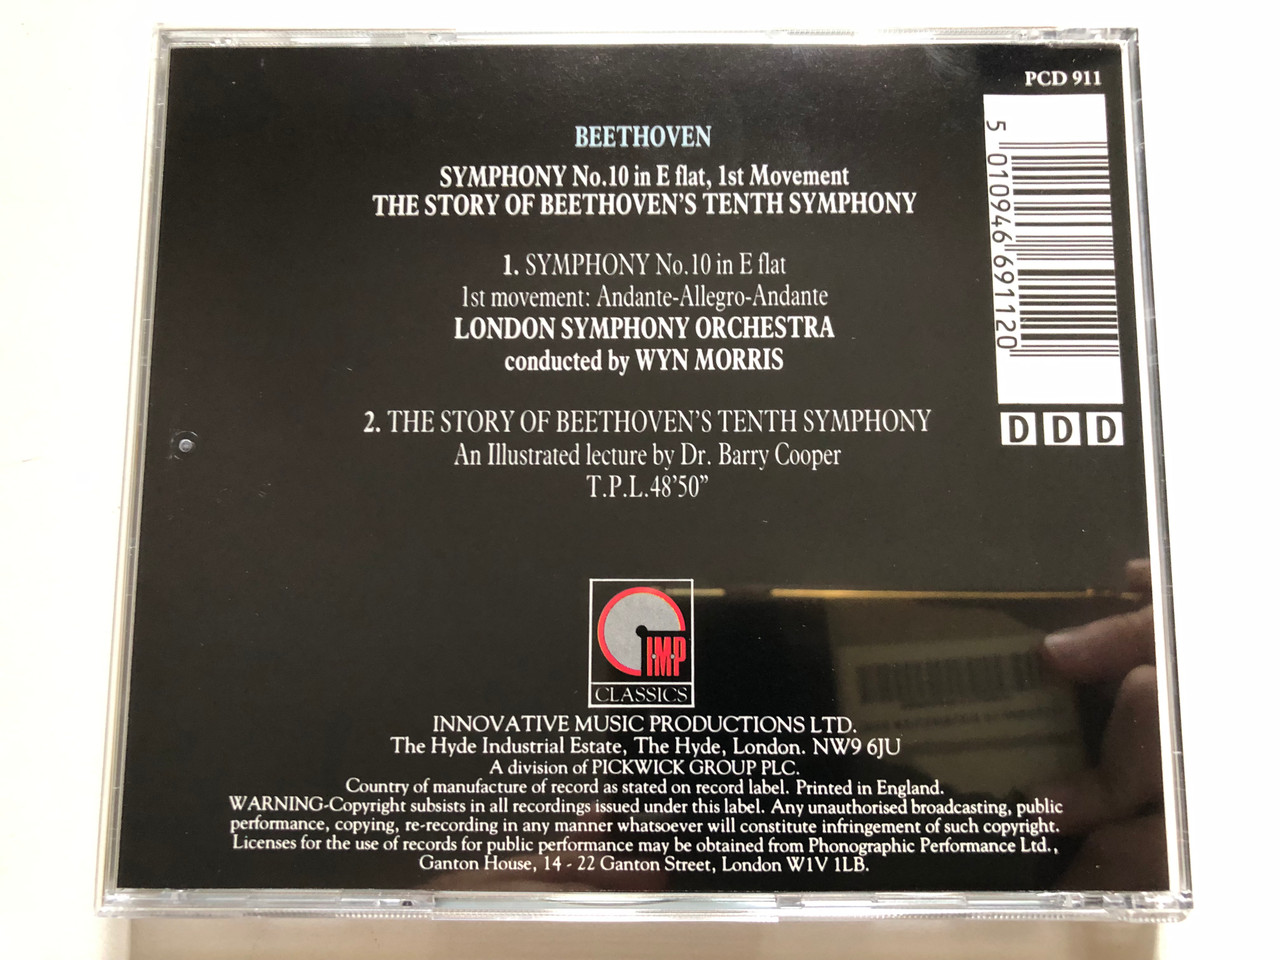 https://cdn10.bigcommerce.com/s-62bdpkt7pb/products/0/images/306640/First_Recording_Of_Beethoven_Symphony_No._10_In_E_Flat_1st_Movement_-_London_Symphony_Orchestra_Conducted_By_Wyn_Morris_The_Story_of_Beethovens_Tenth_Symphony._An_illustrated_lecture_by_4__90078.1698329278.1280.1280.JPG?c=2